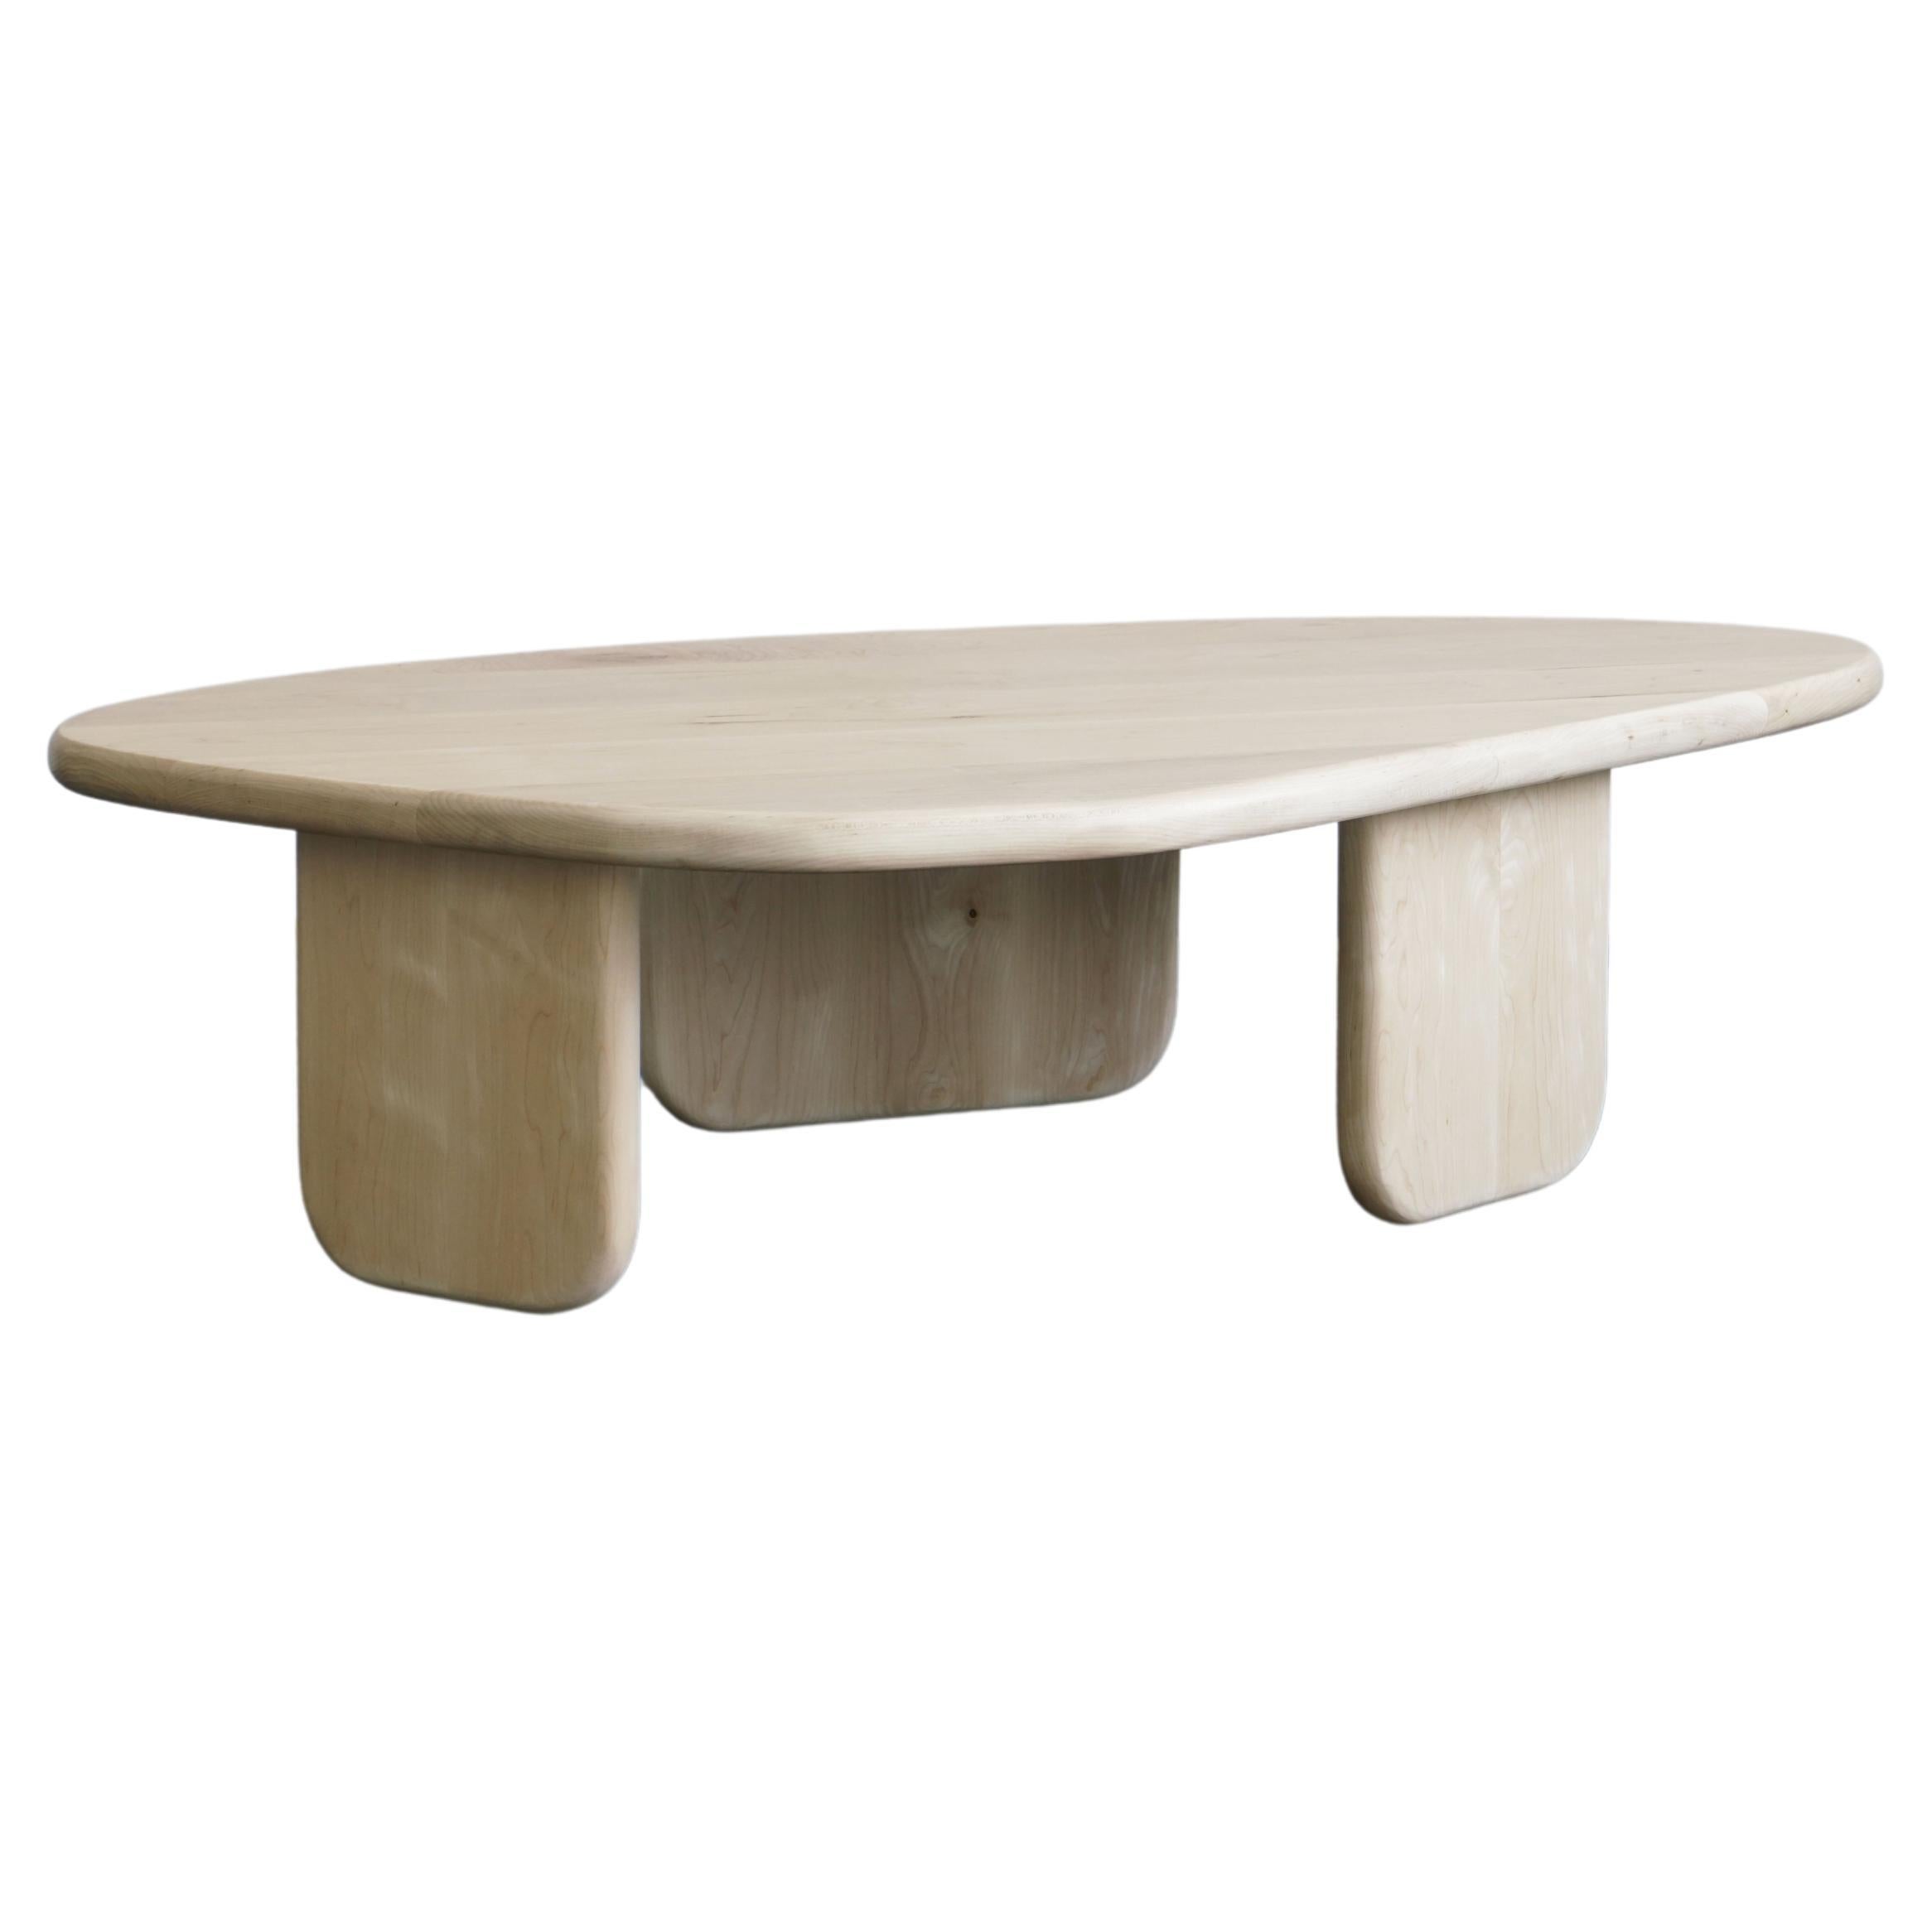 Organic Shaped Coffee Table by Last Workshop, Custom options, made to order